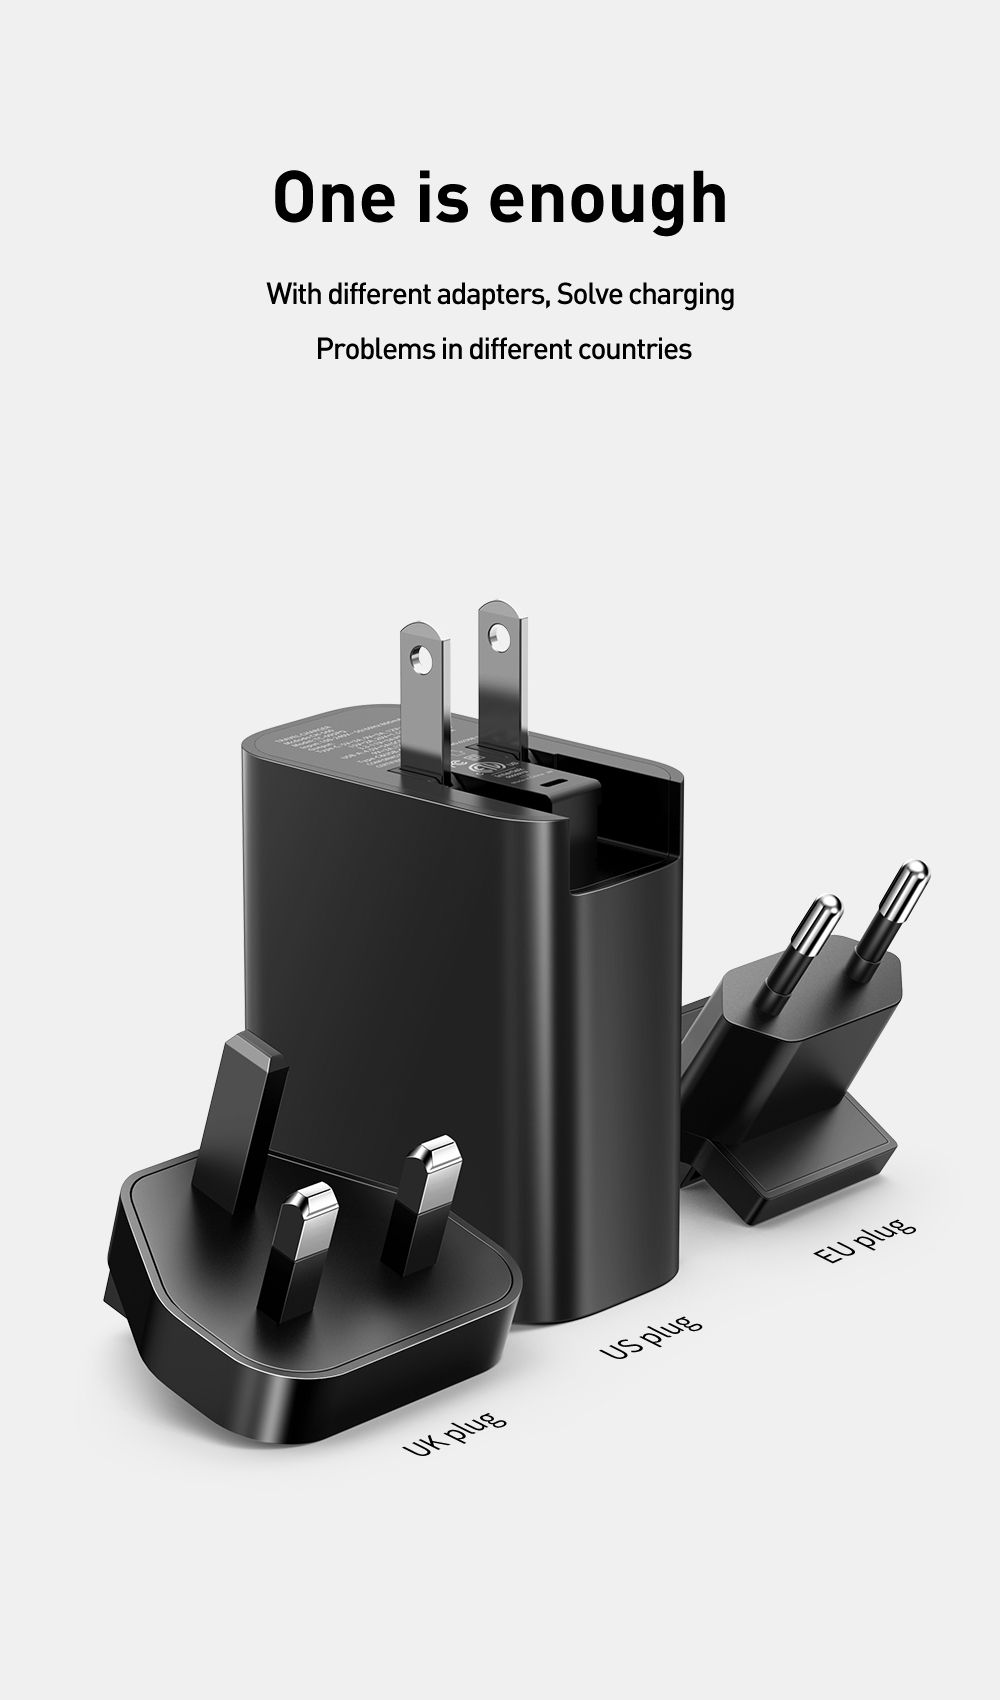 Mcdodo-30W-PD-Charger-5A-Super-Fast-Charge-3-in-1-EU-US-UK-Travel-Wall-Adapter-for-Samsung-Galaxy-No-1747961